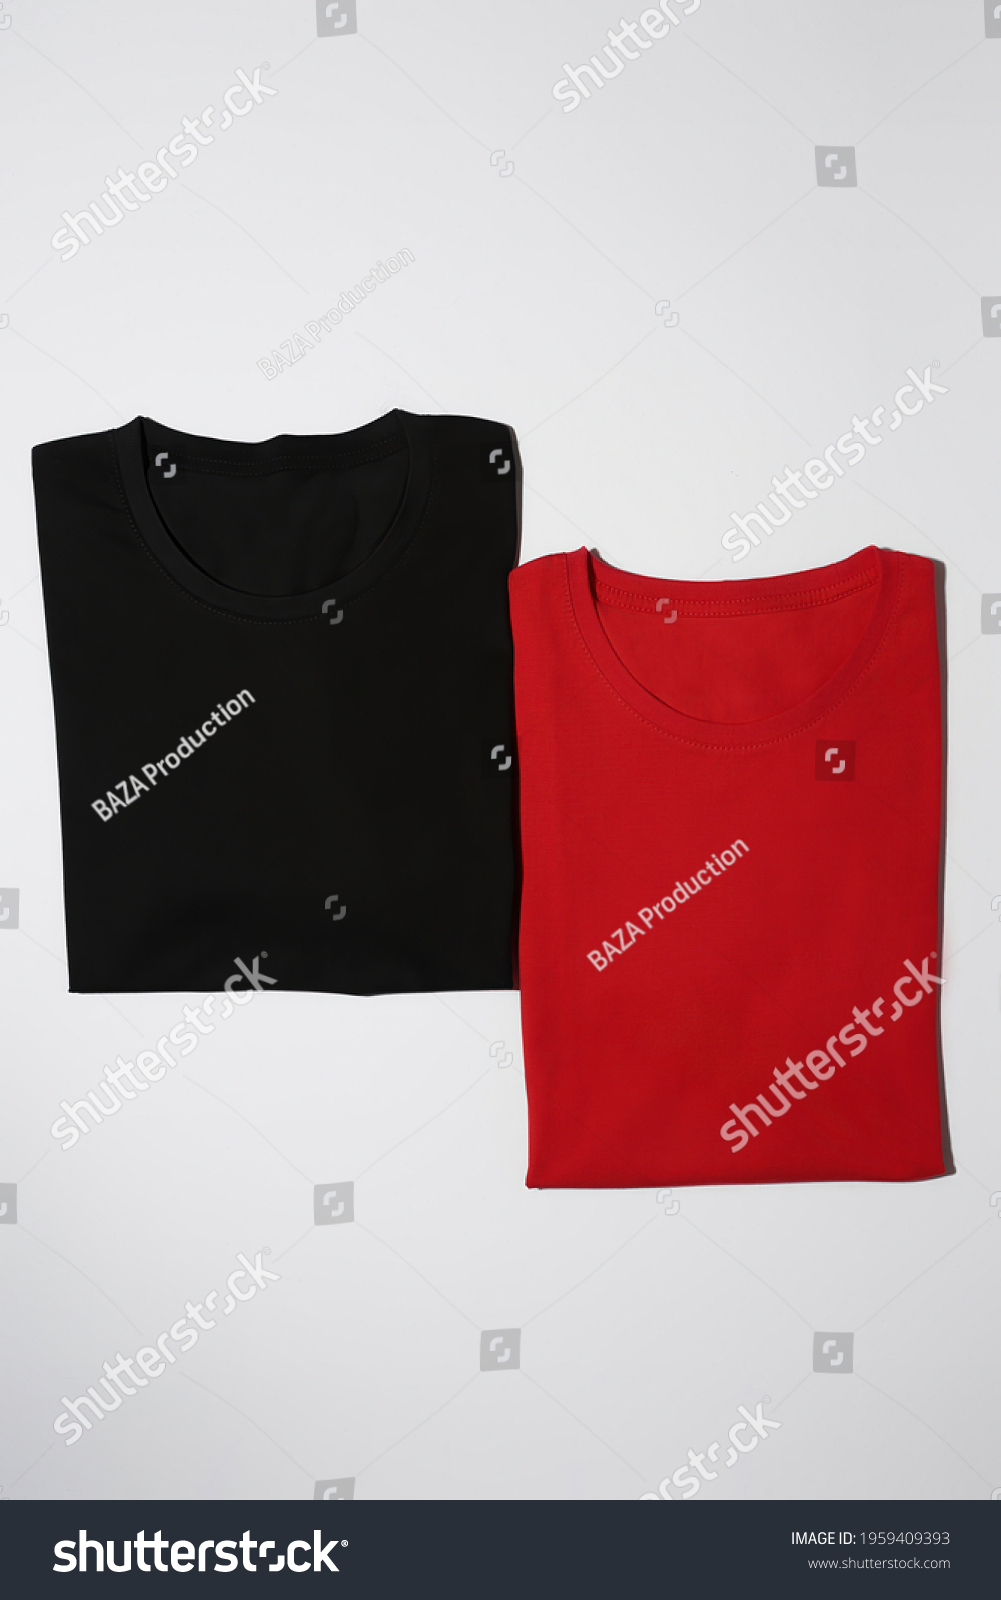 Two folded colorful black and red cotton t shirts isolated on white background. Flat lay tees template. Clothes, fashion, retail concept. Vertical shot #1959409393